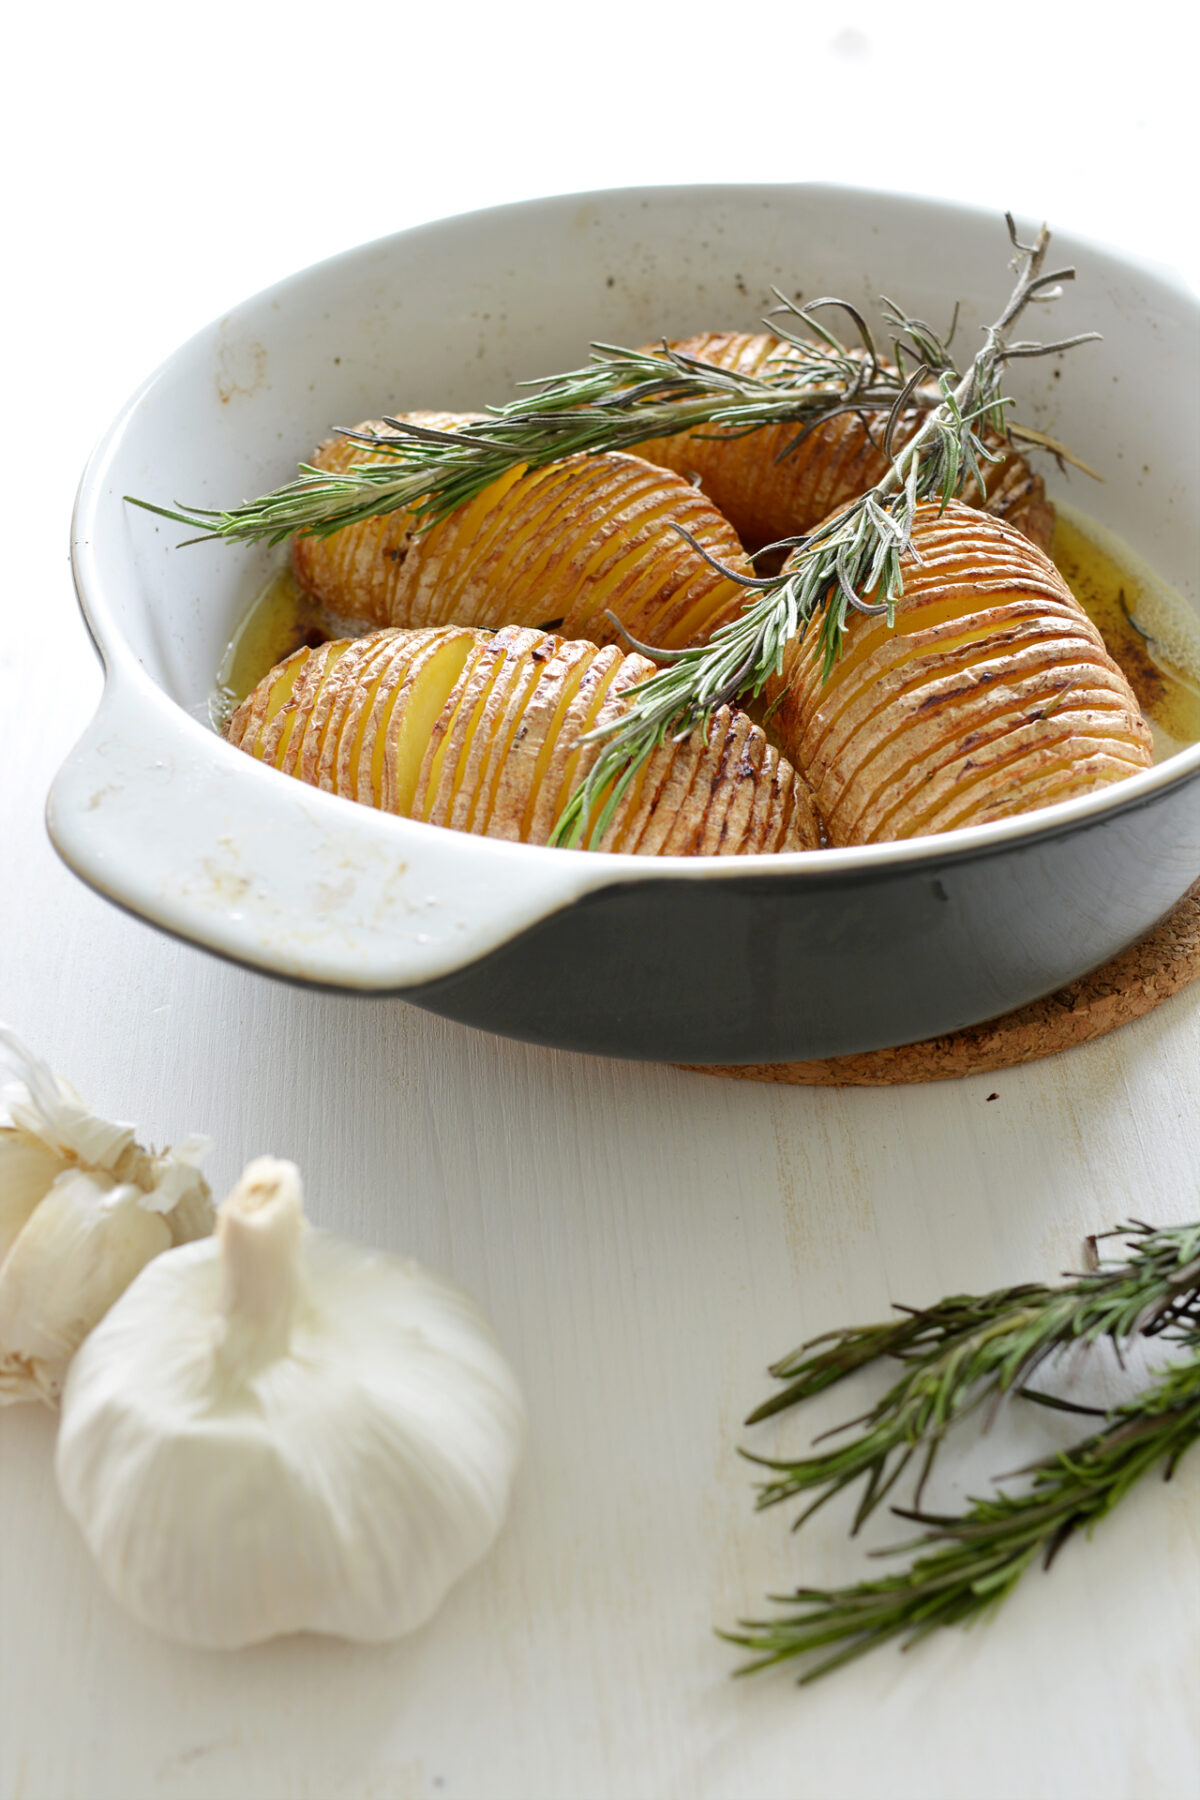 Hasselback Potatoes in a casserole dish on a white table with garlic and rosemary.